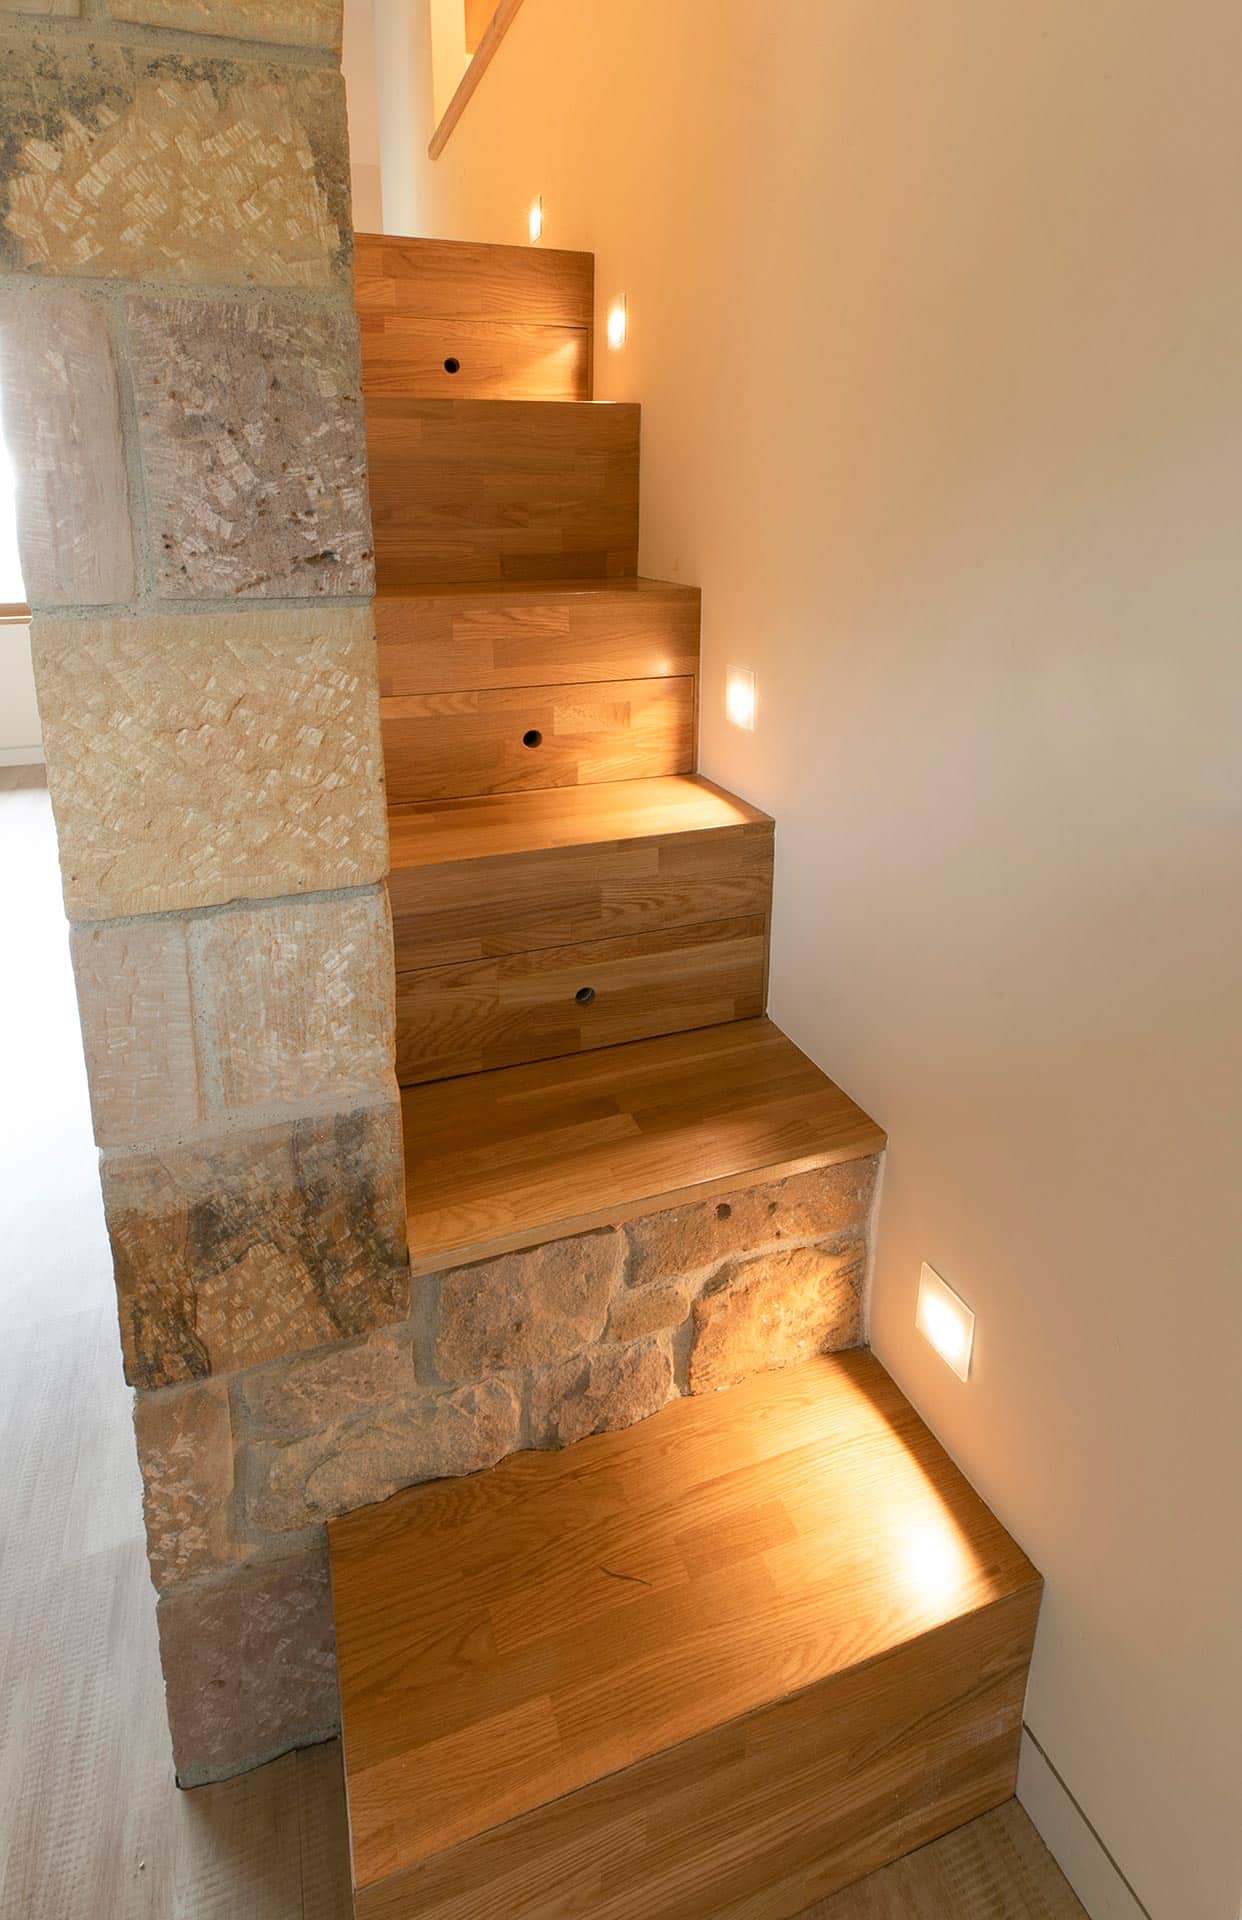 Wood and Stone stairs in passive cottage in Proaño designed by Moah Architects in Cantabria